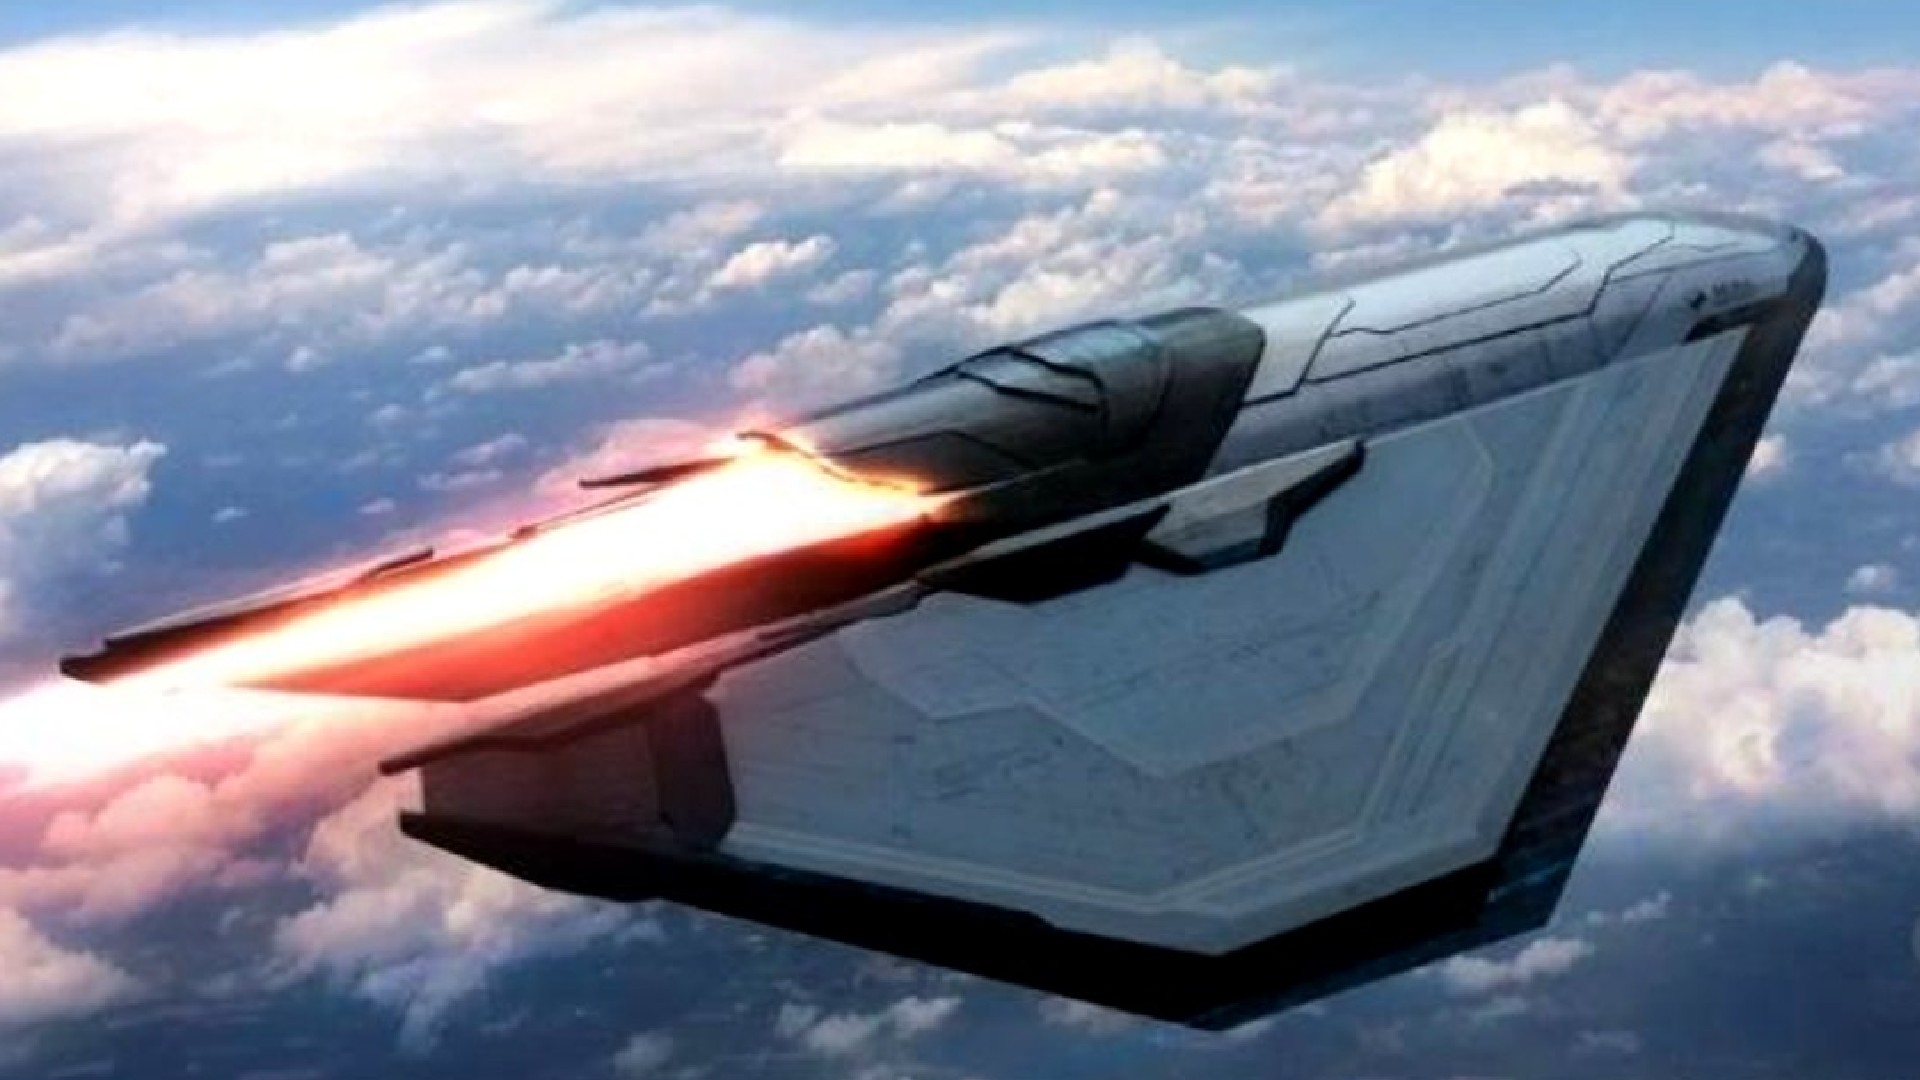 Aviation Startup To Launch Hypersonic Plane That Can Reach Anywhere On The Earth In Just 1 Hour